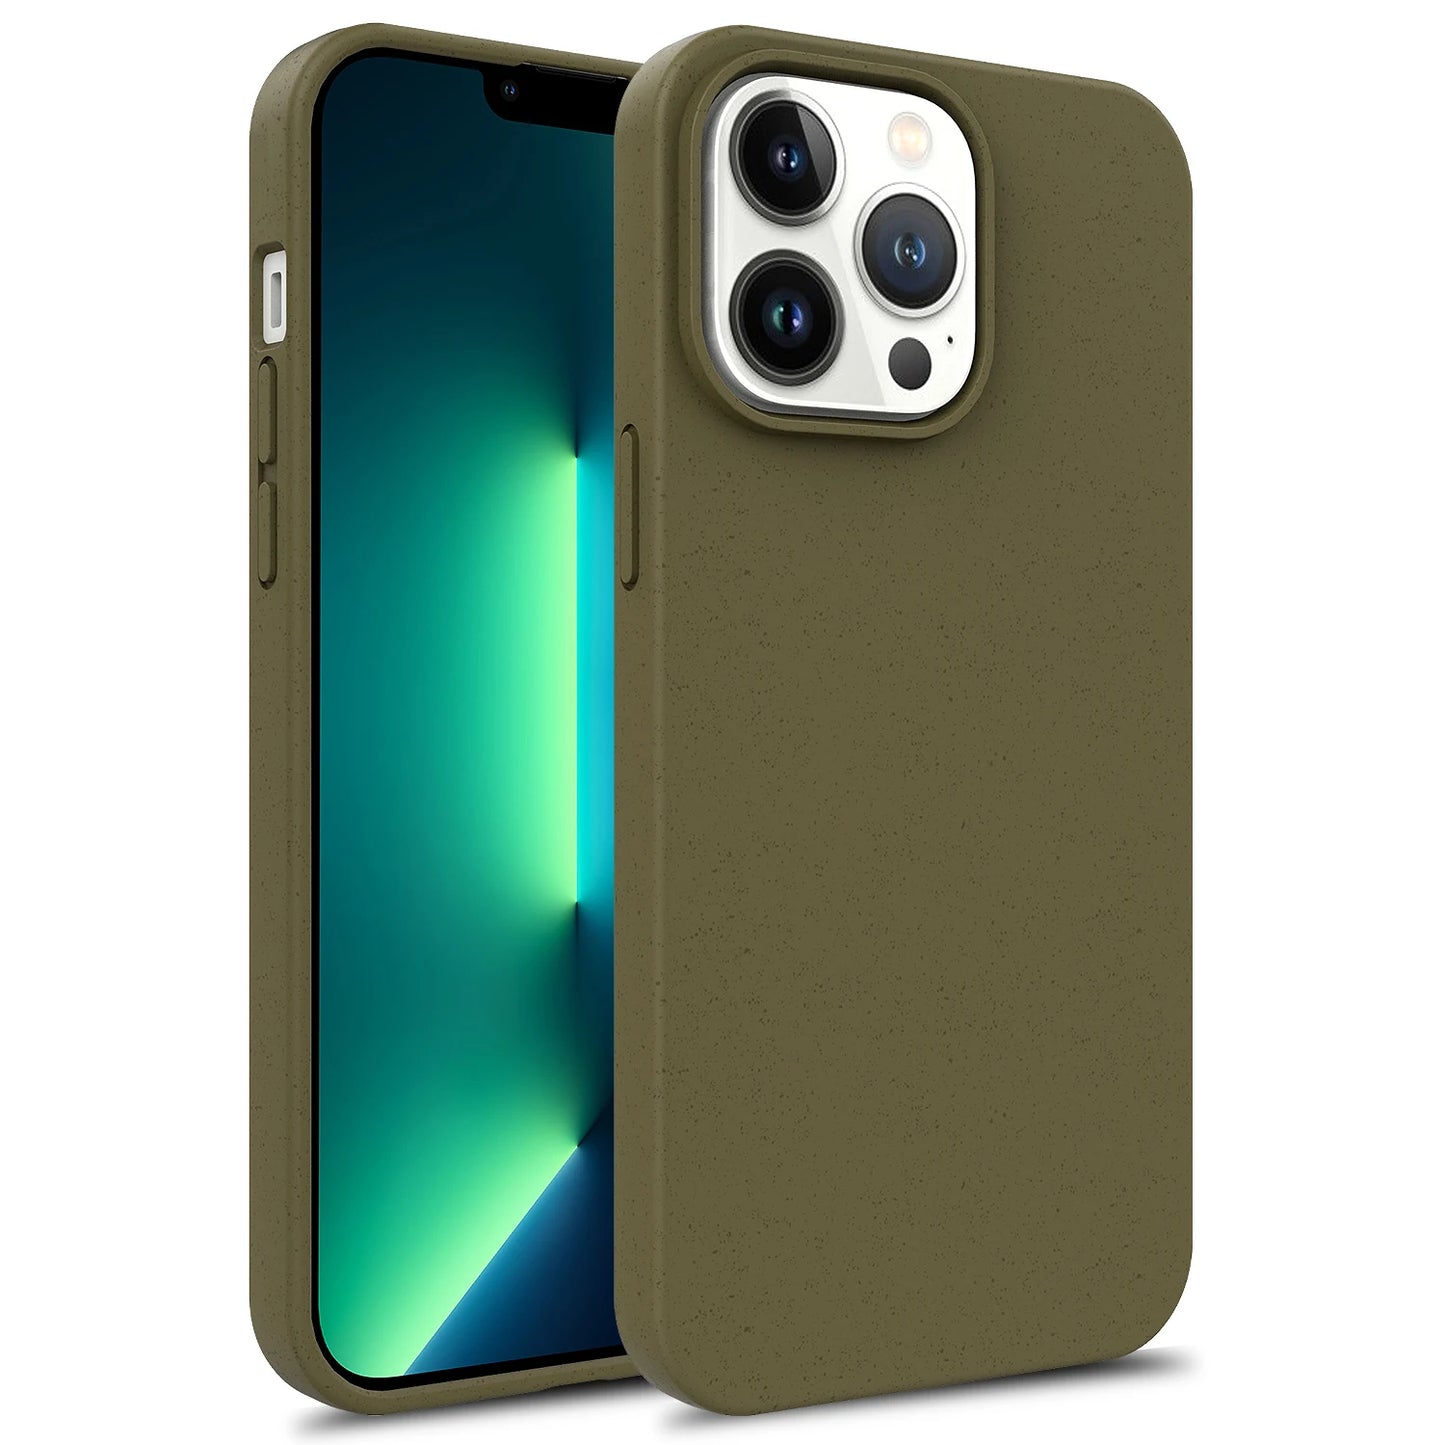 Eco-Wheat Silicone Case For iPhone 12 13 14 15 Pro Max Plus Cover